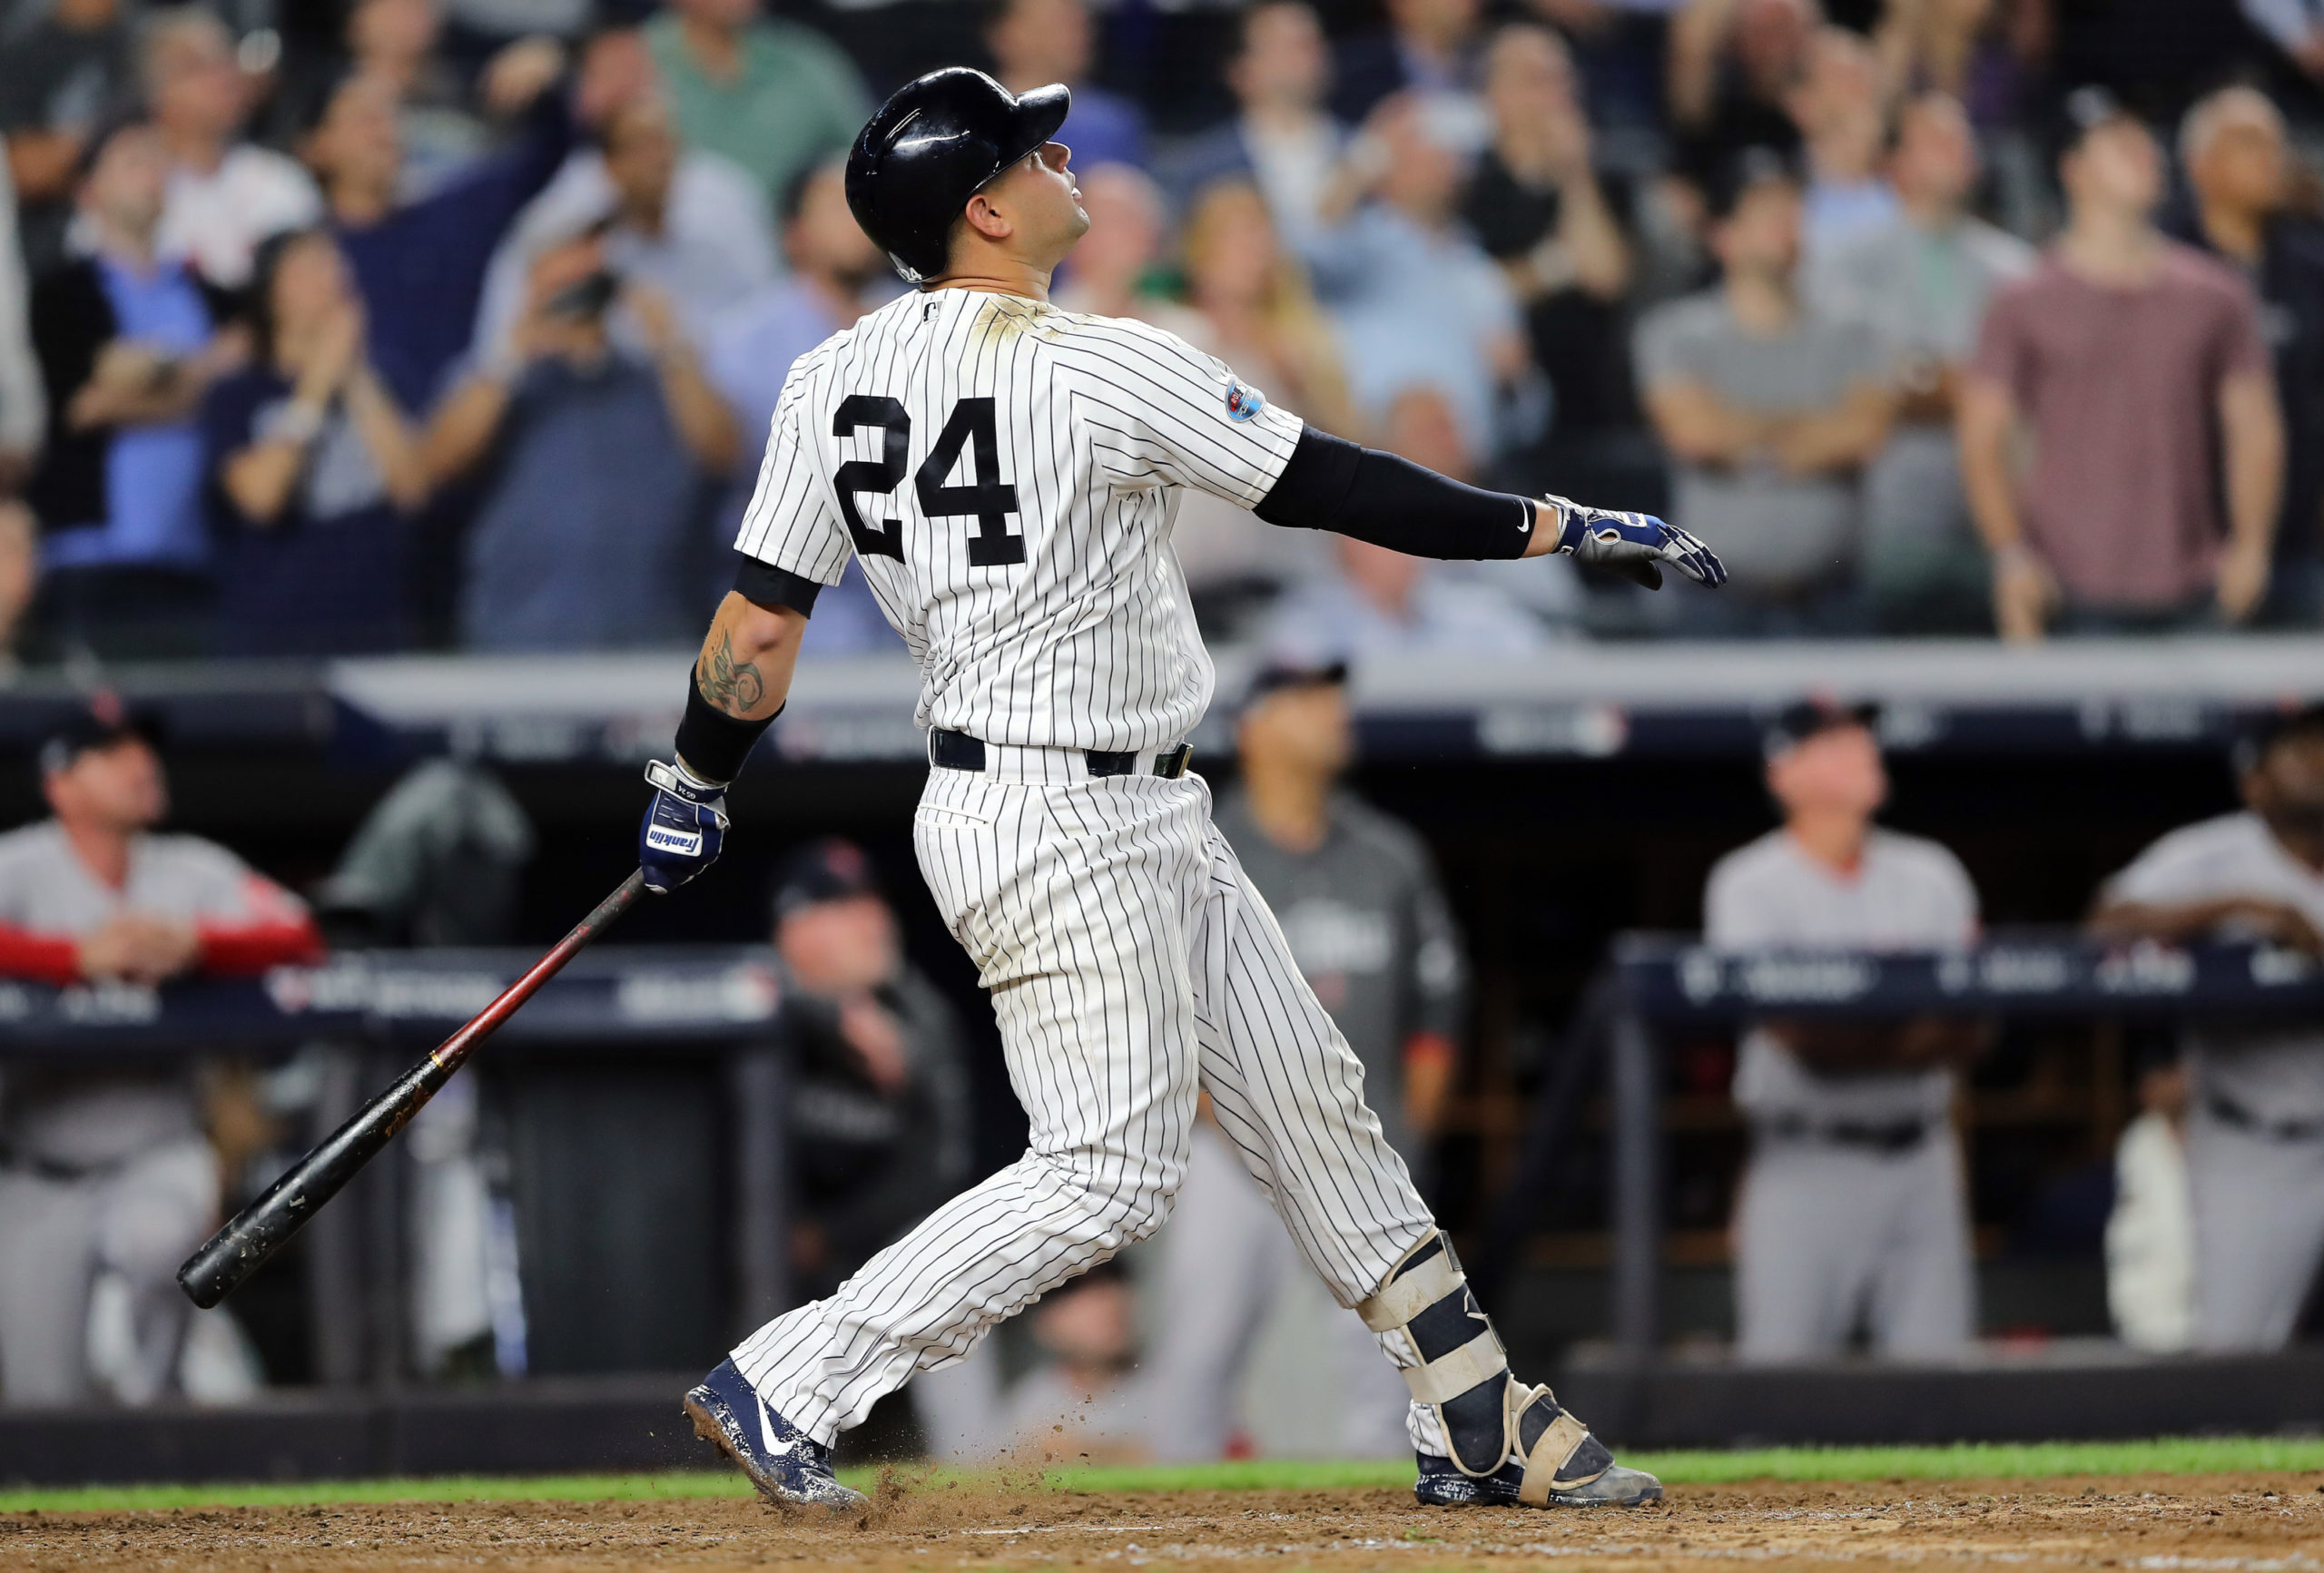 Why I'm not giving up on Gary Sanchez